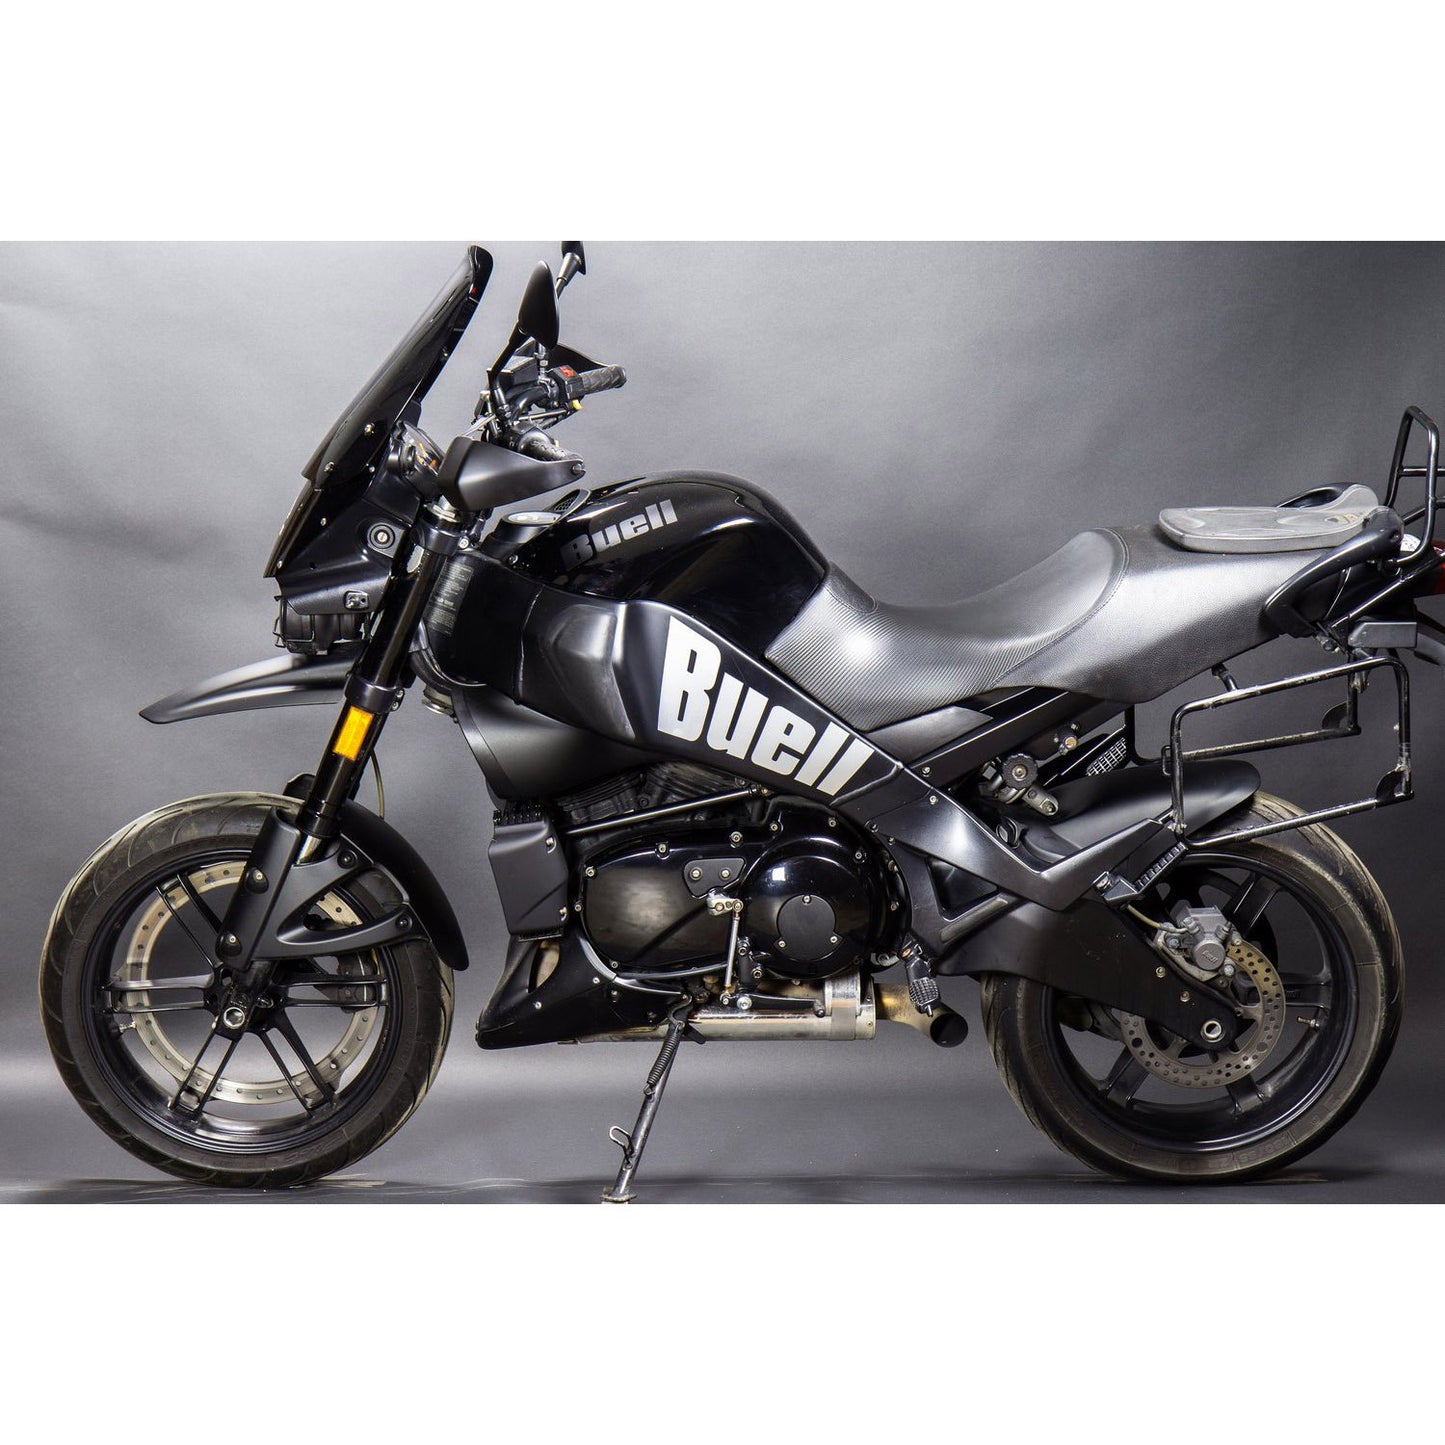 Buell frame stickers